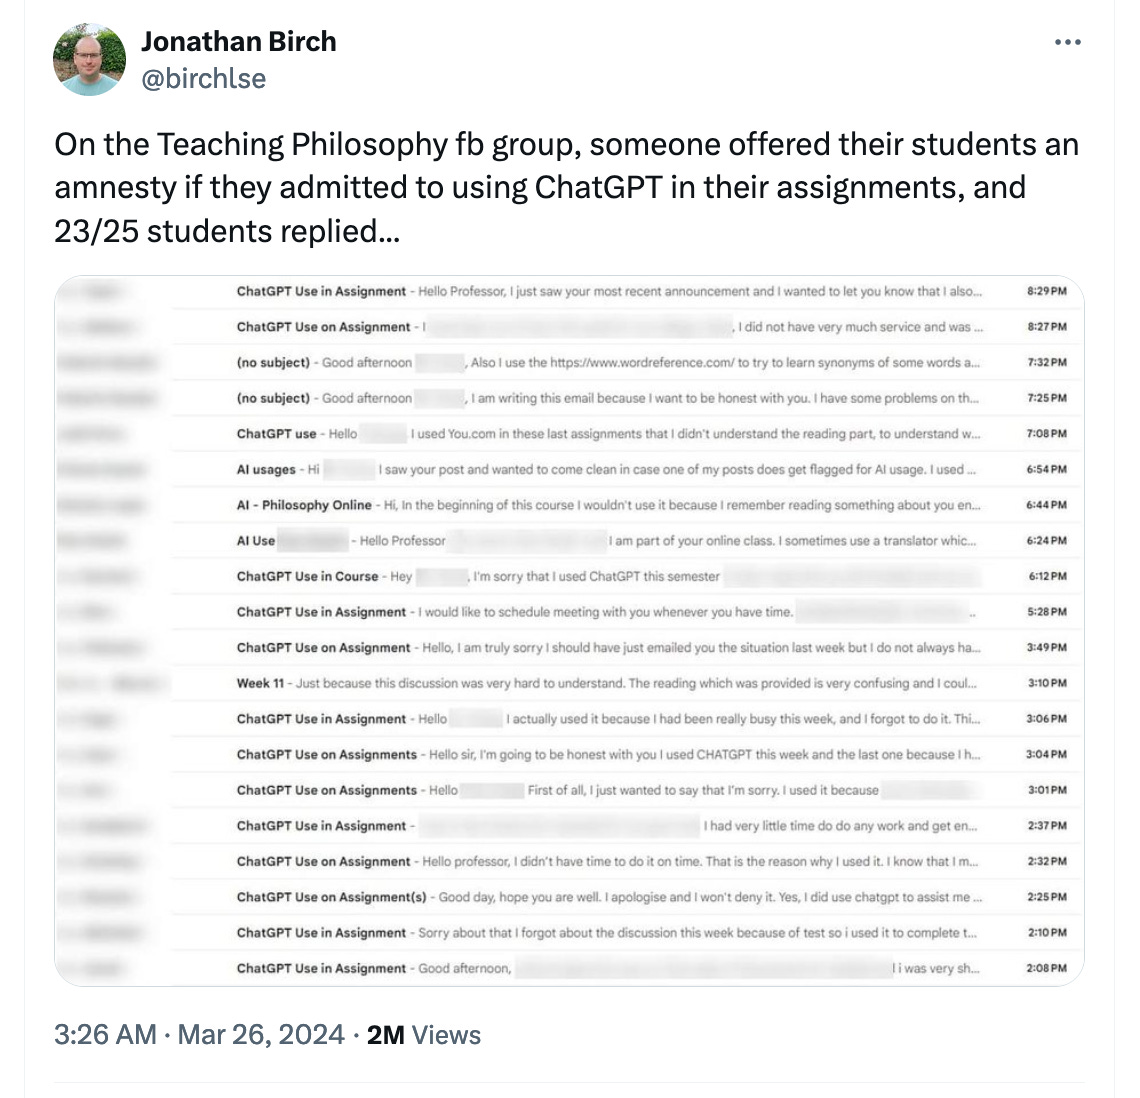 College humanities instructor offers amnesty for students who admit to using ChatGPT in their class—and 23 out of 25 students responded